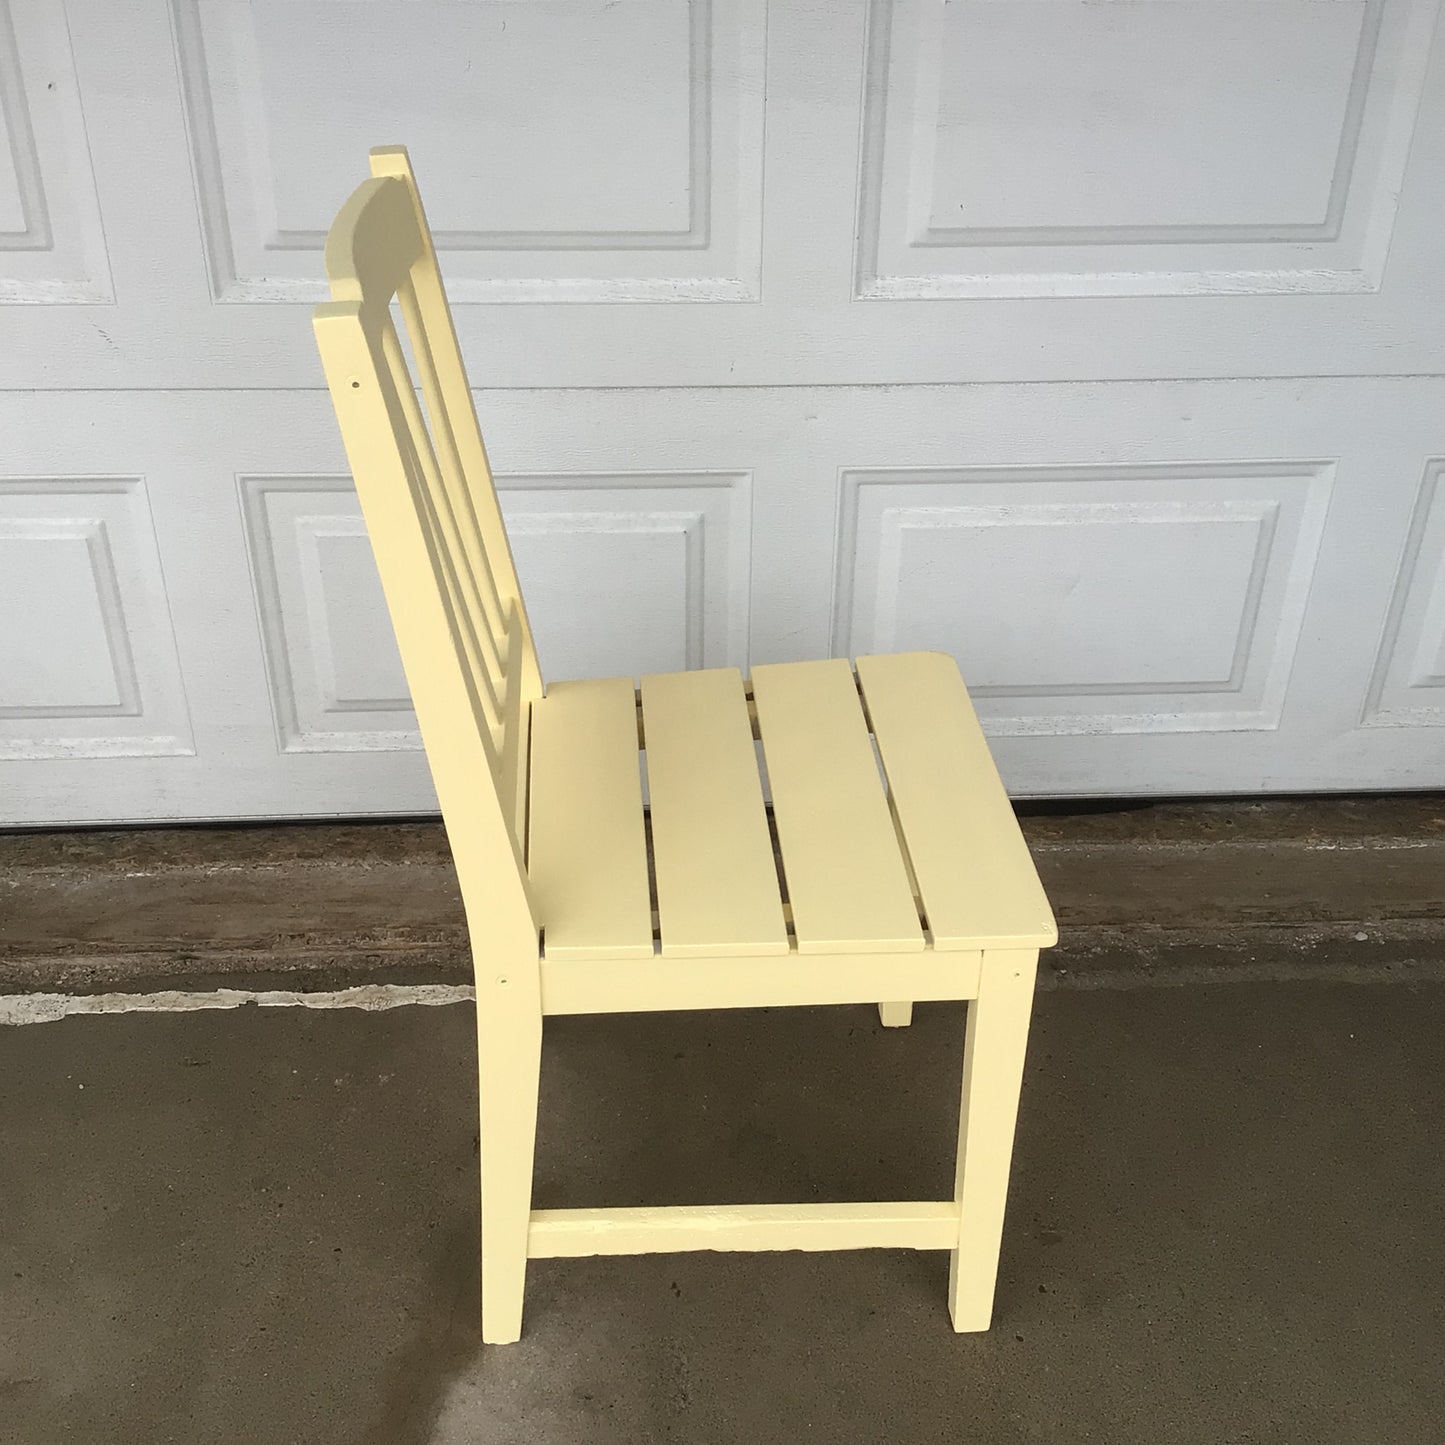 Pale Yellow Painted Chair